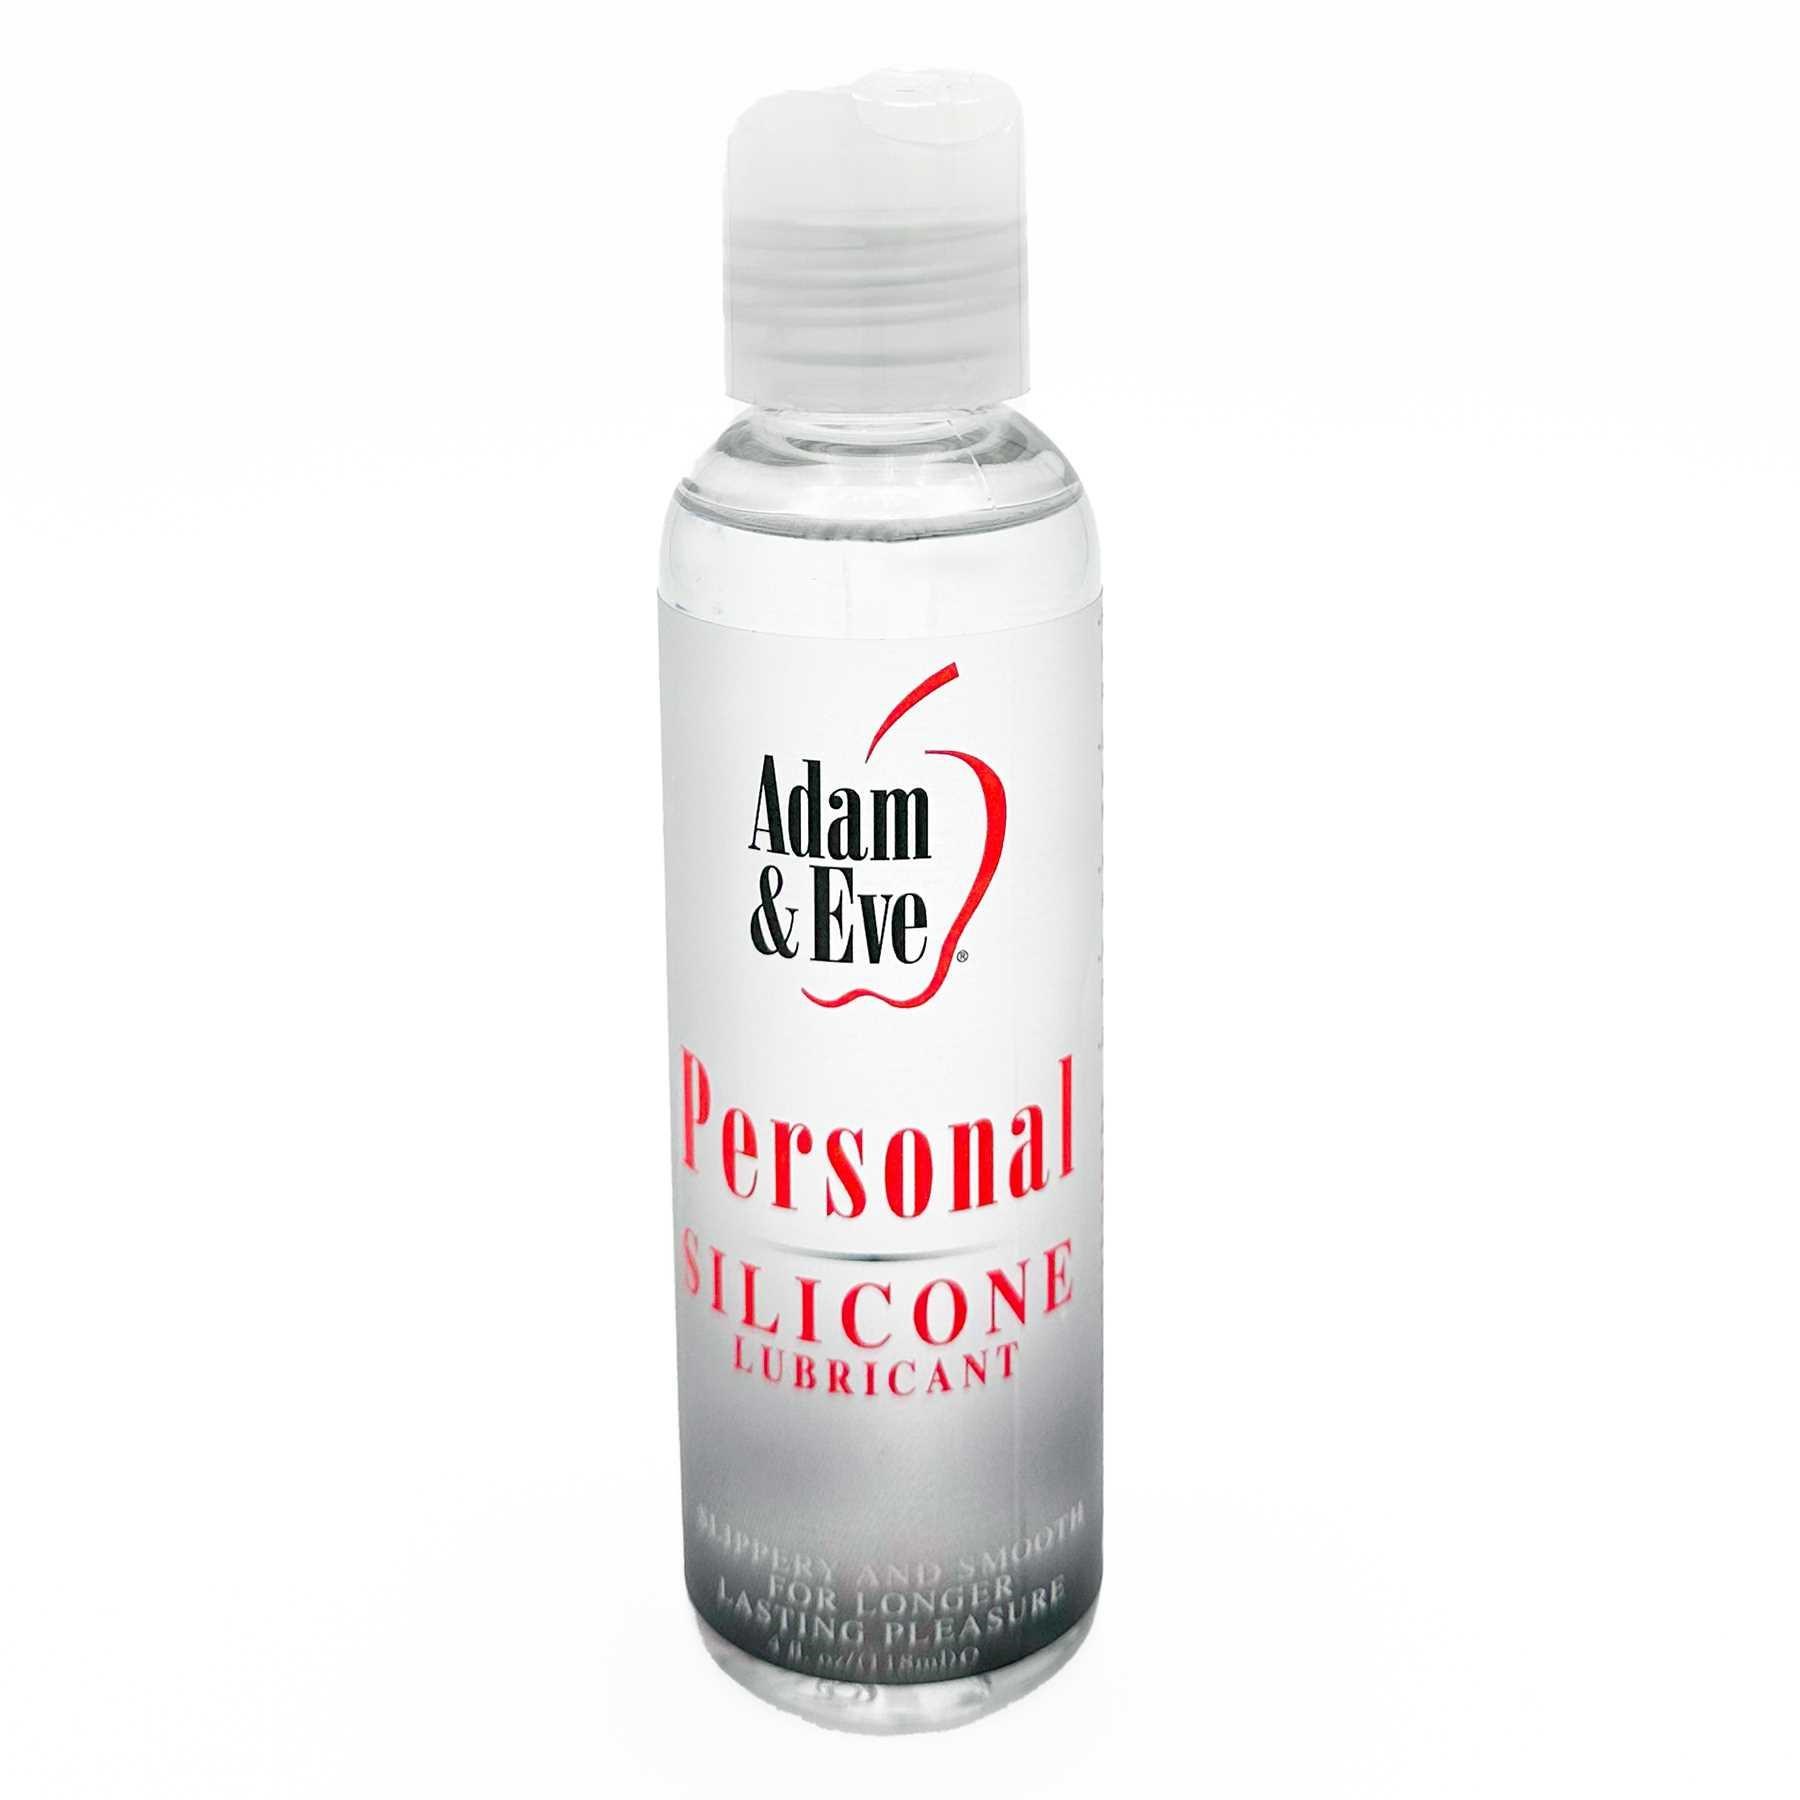 Adam & Eve Personal Silicone Lubricant 4 oz front of bottle